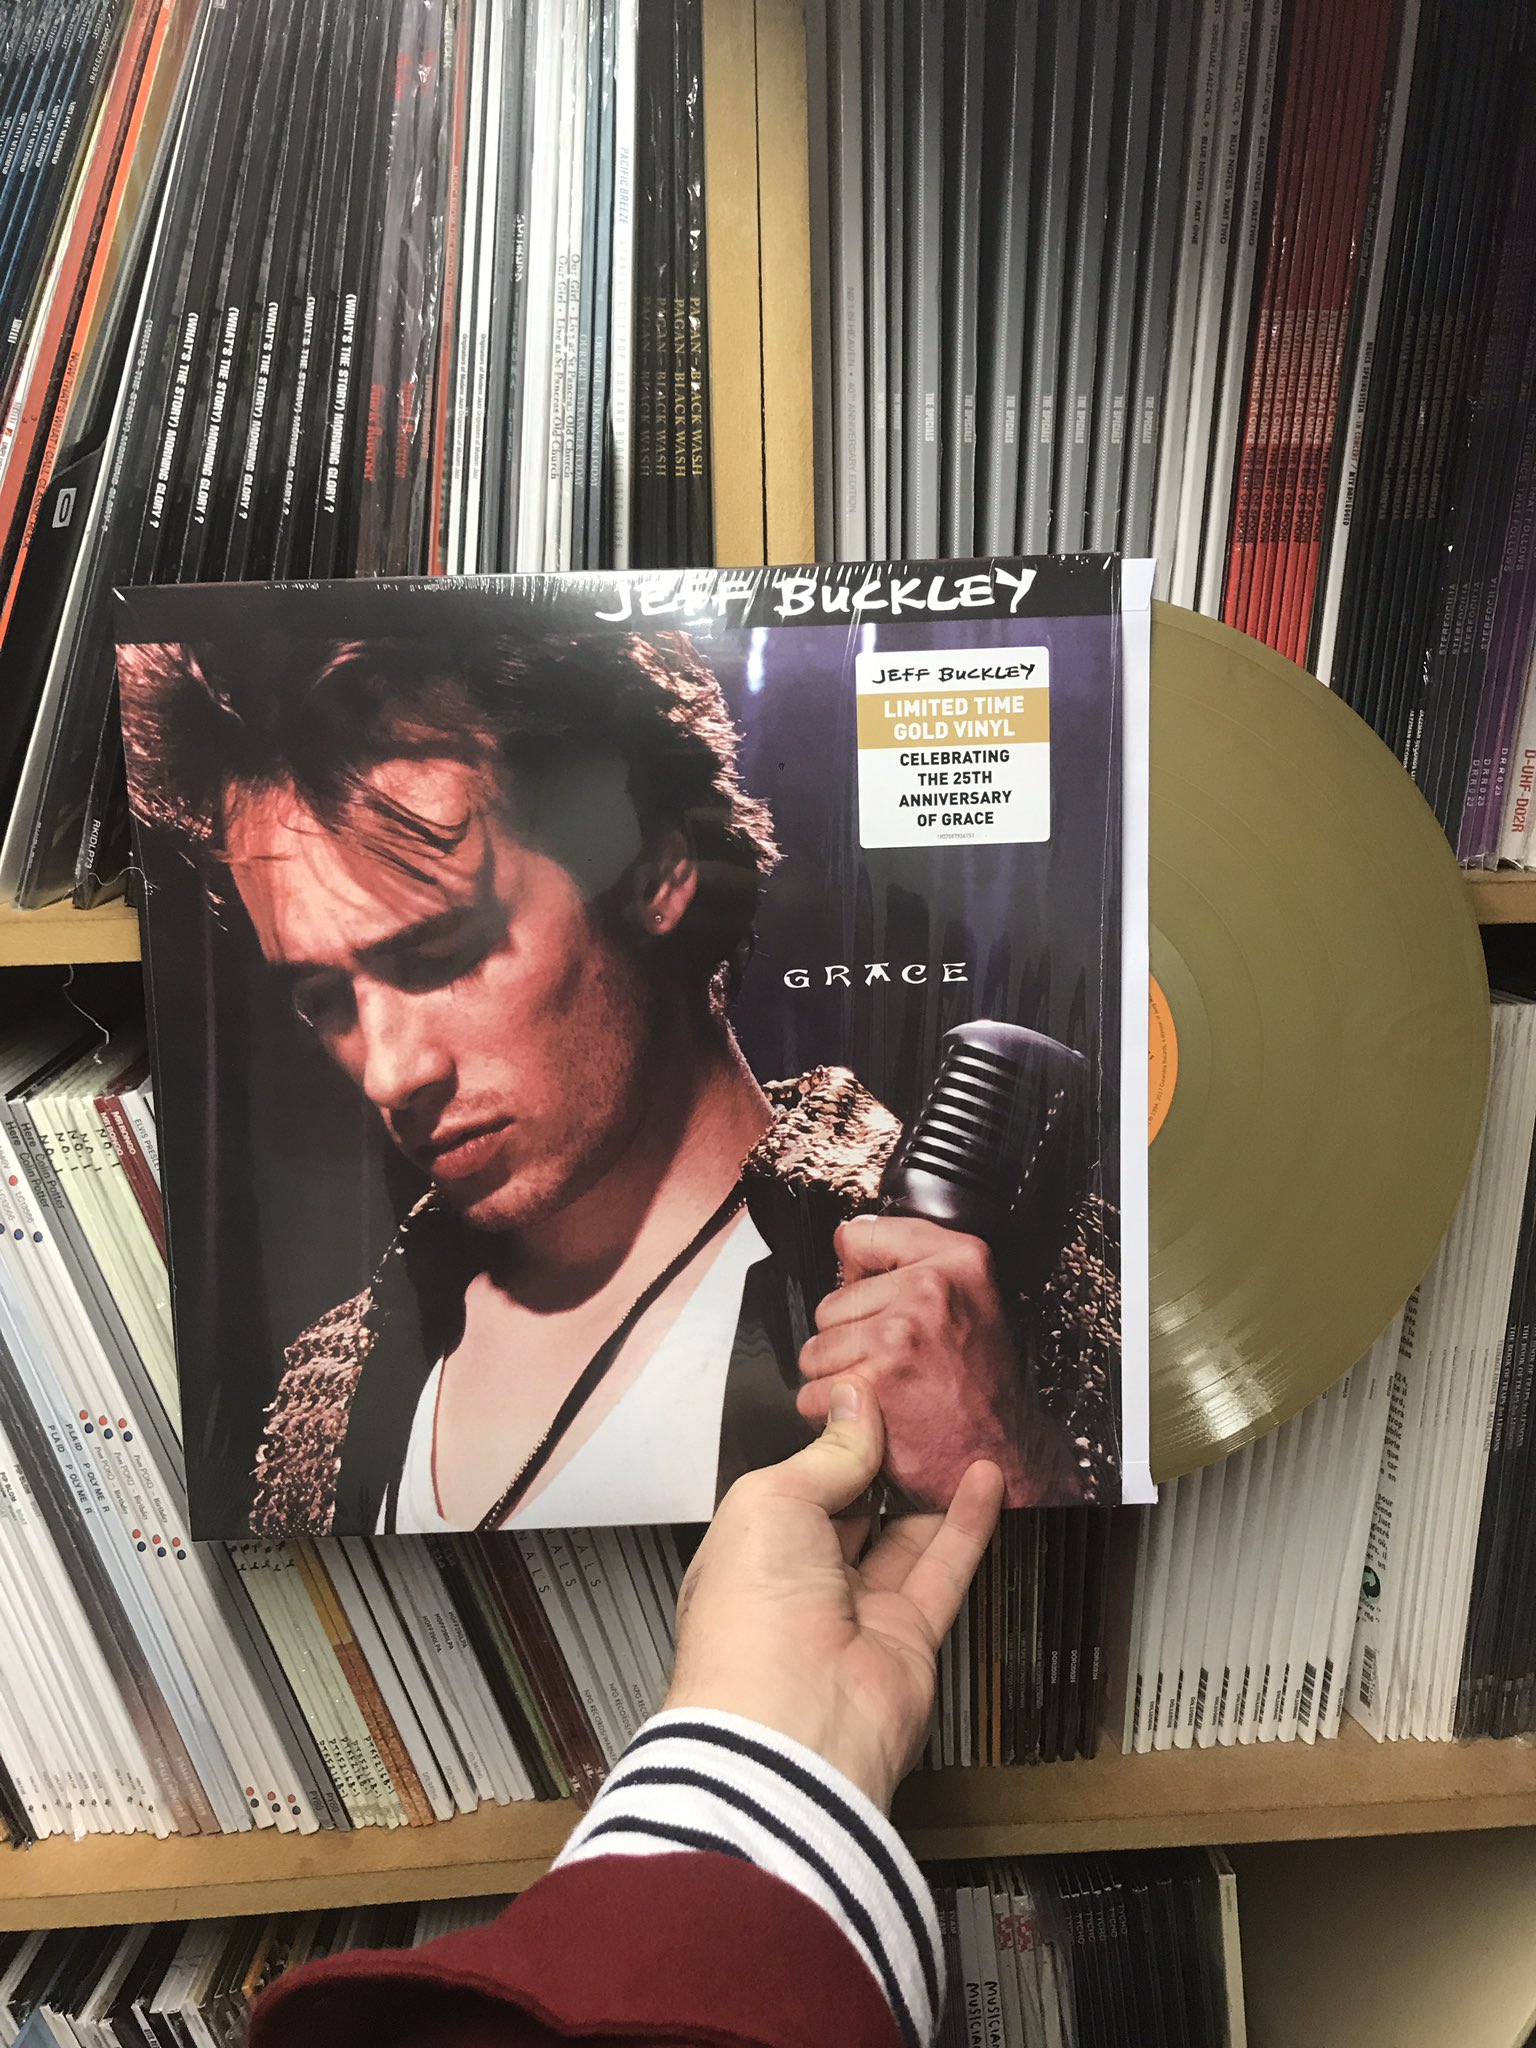 Vandre Grand Fascinate resident on Twitter: "It's the 25th anniversary of this rather special JEFF  BUCKLEY album, and to celebrate we have a few copies of it on limited gold  wax! Nab a copy here